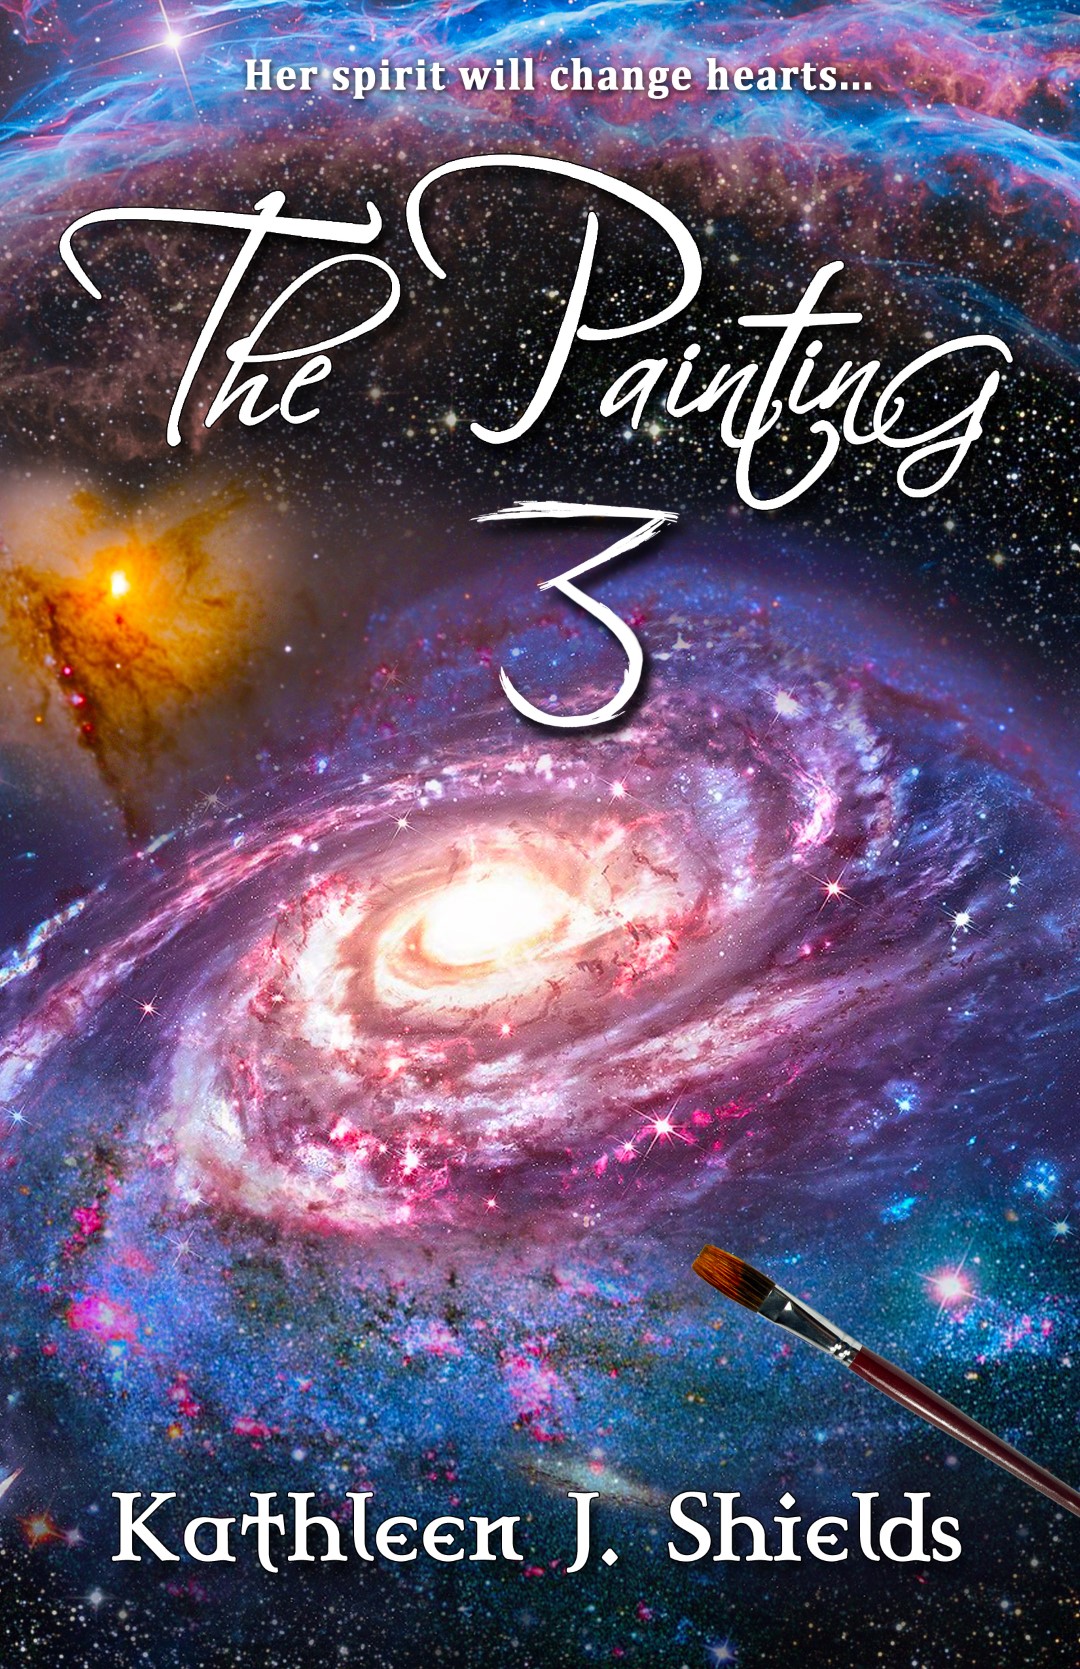 The Painting 3 Trilogy by author Kathleen J. Shields